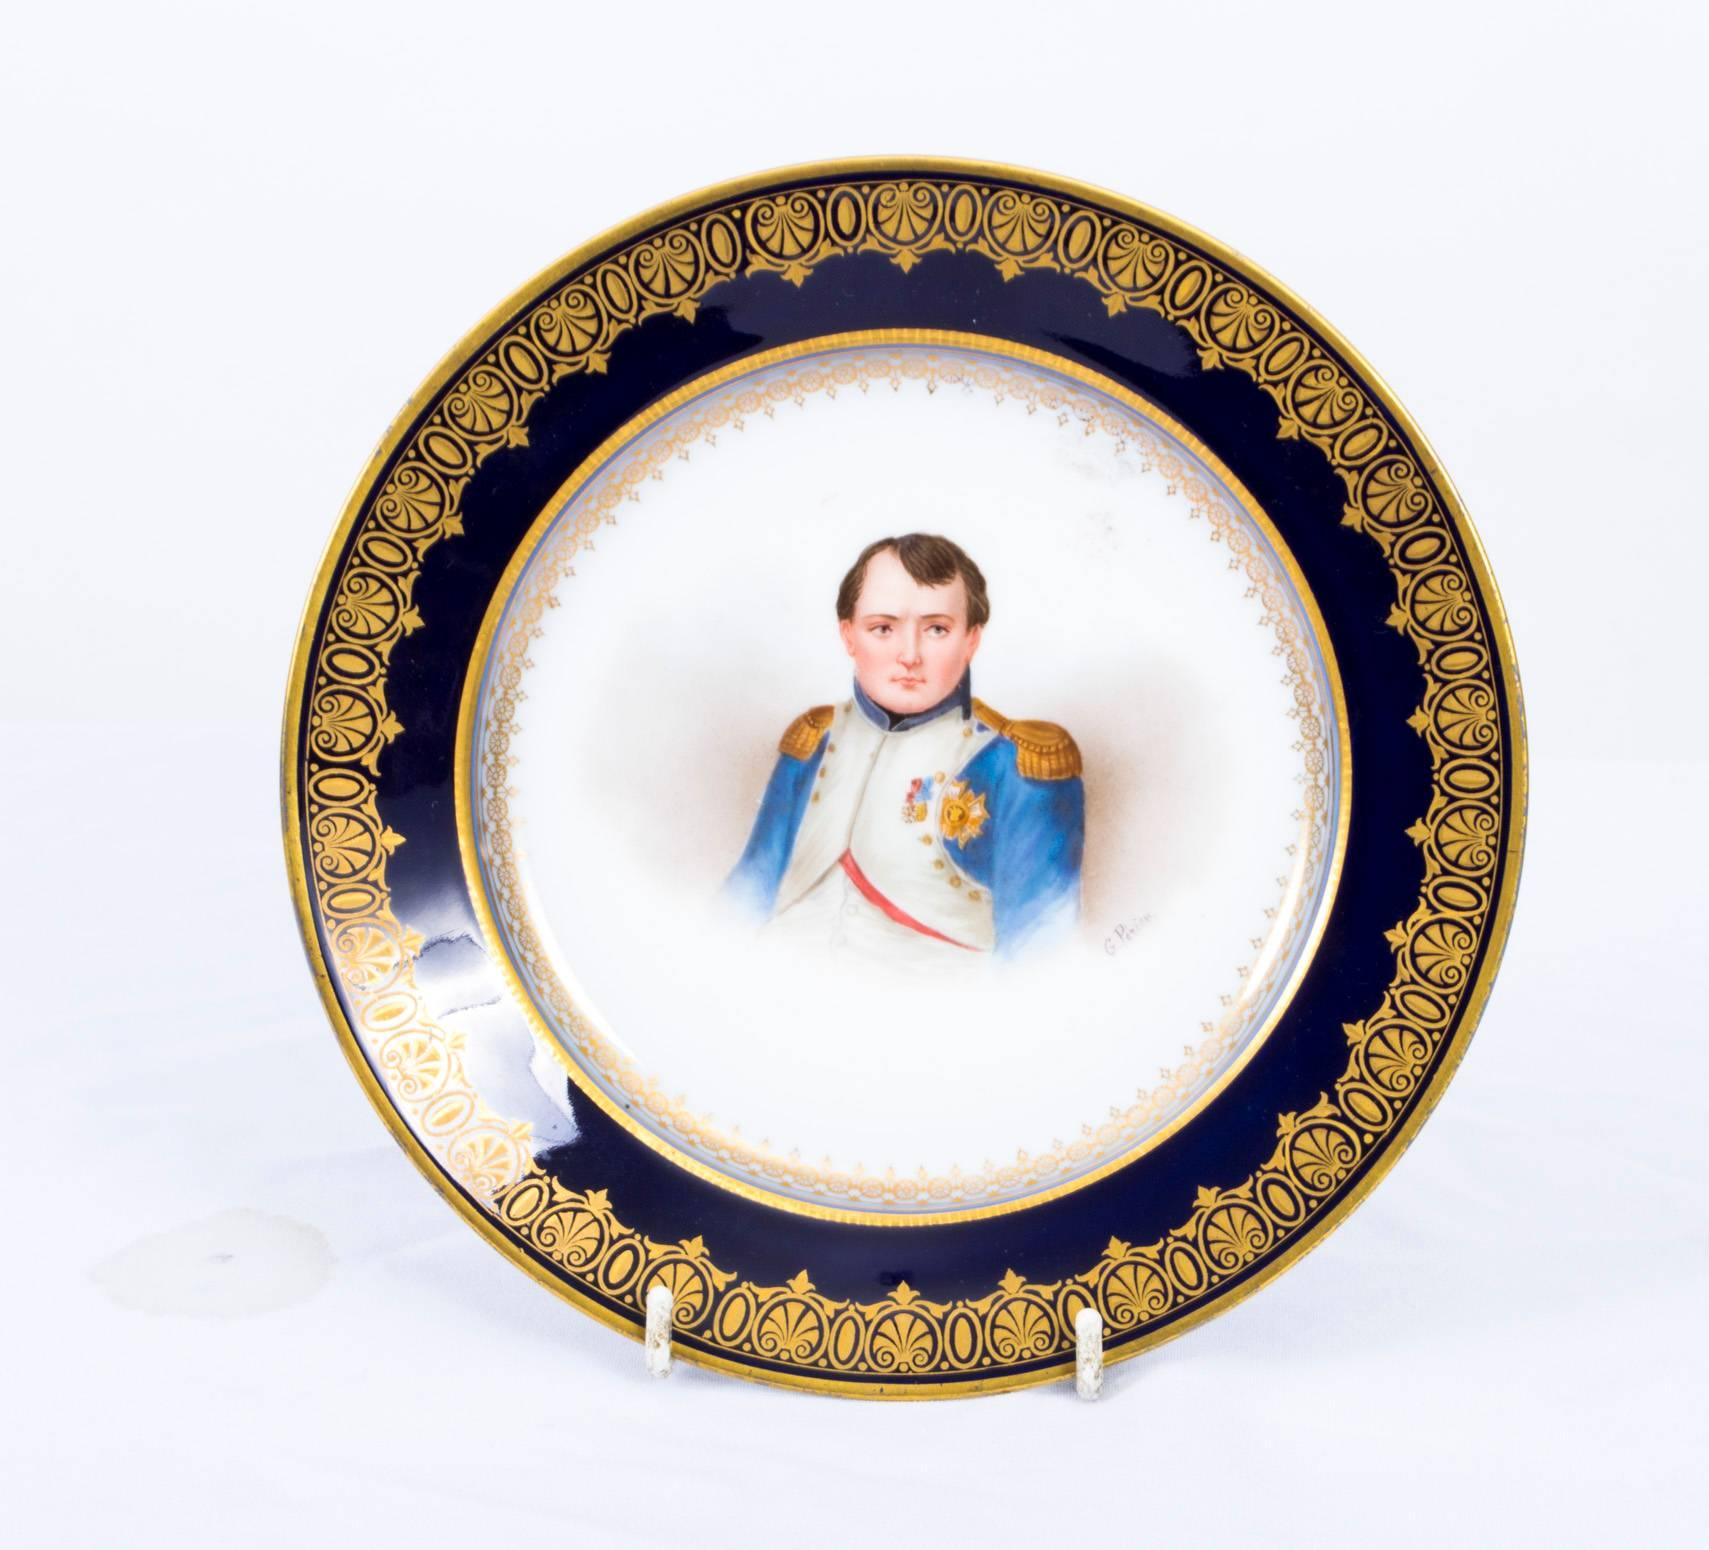 This is an absolutely fabulous and decorative antique pair of 19th century Sevres porcelain cabinet plates, signed G.Periers.

They have striking cobalt blue and gilt tooled borders framing named portraits of Napoleon and Im peratrice